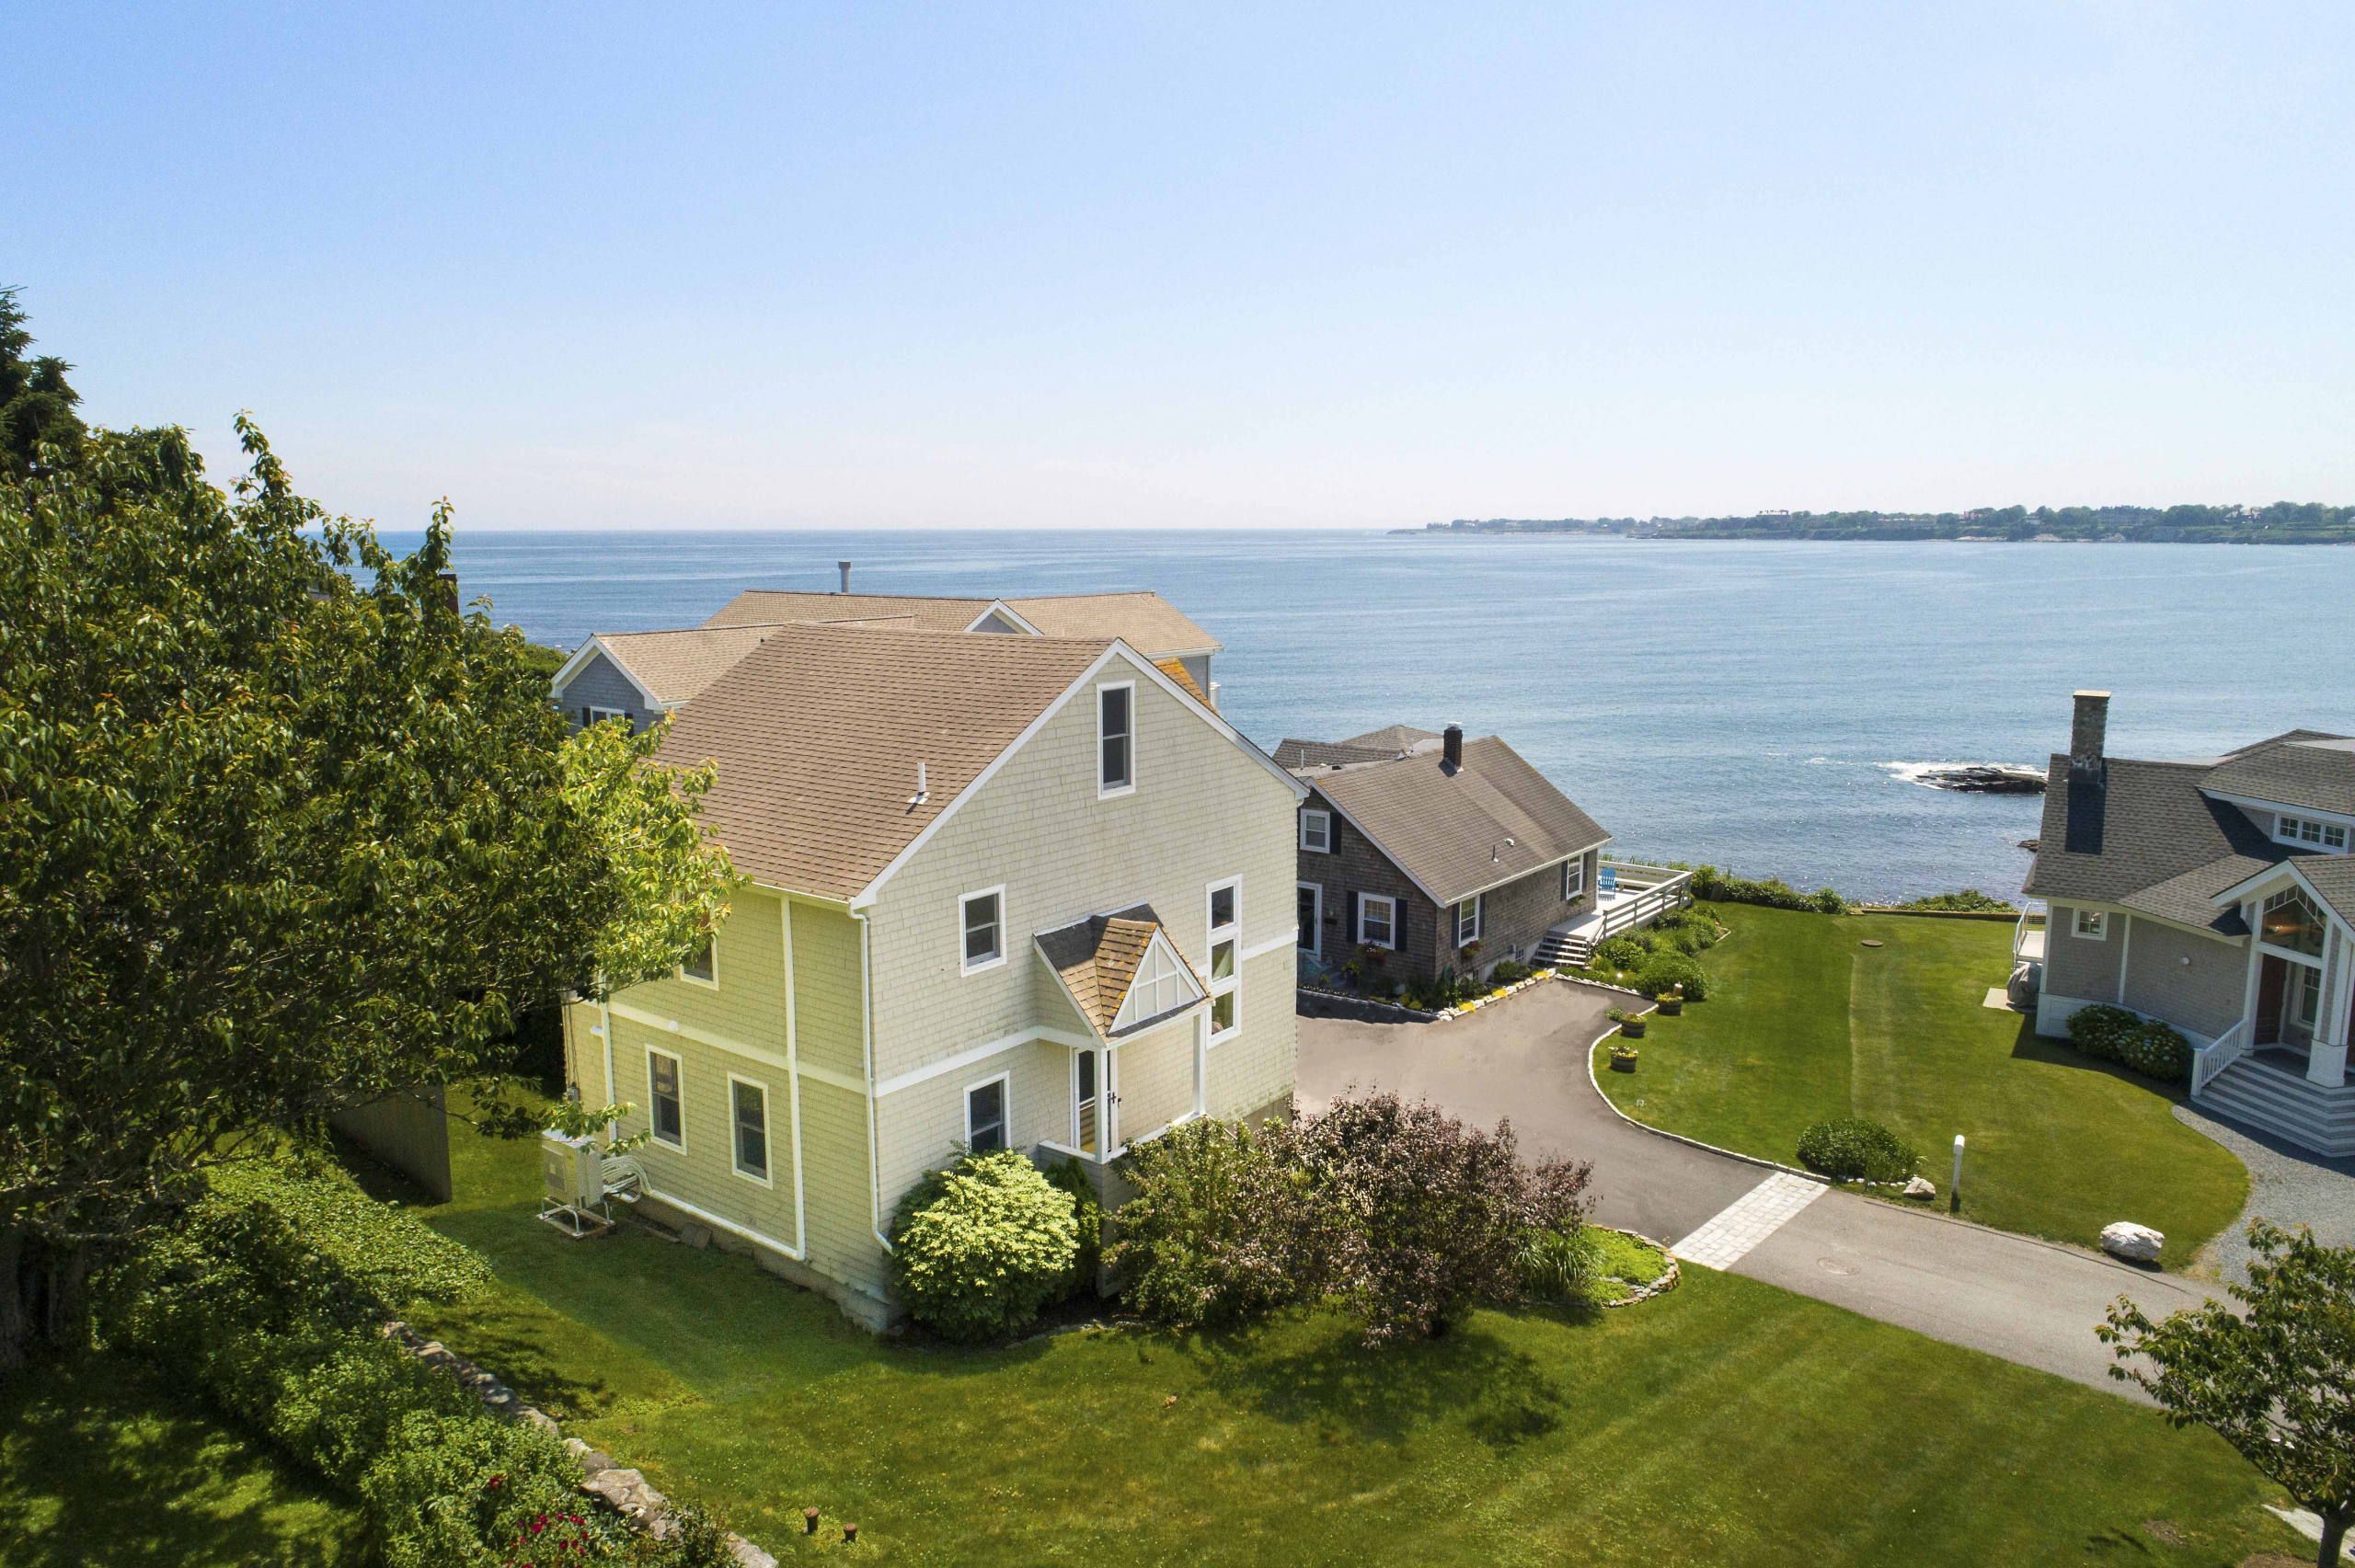 Easton’s Point home sells for $1.21 million